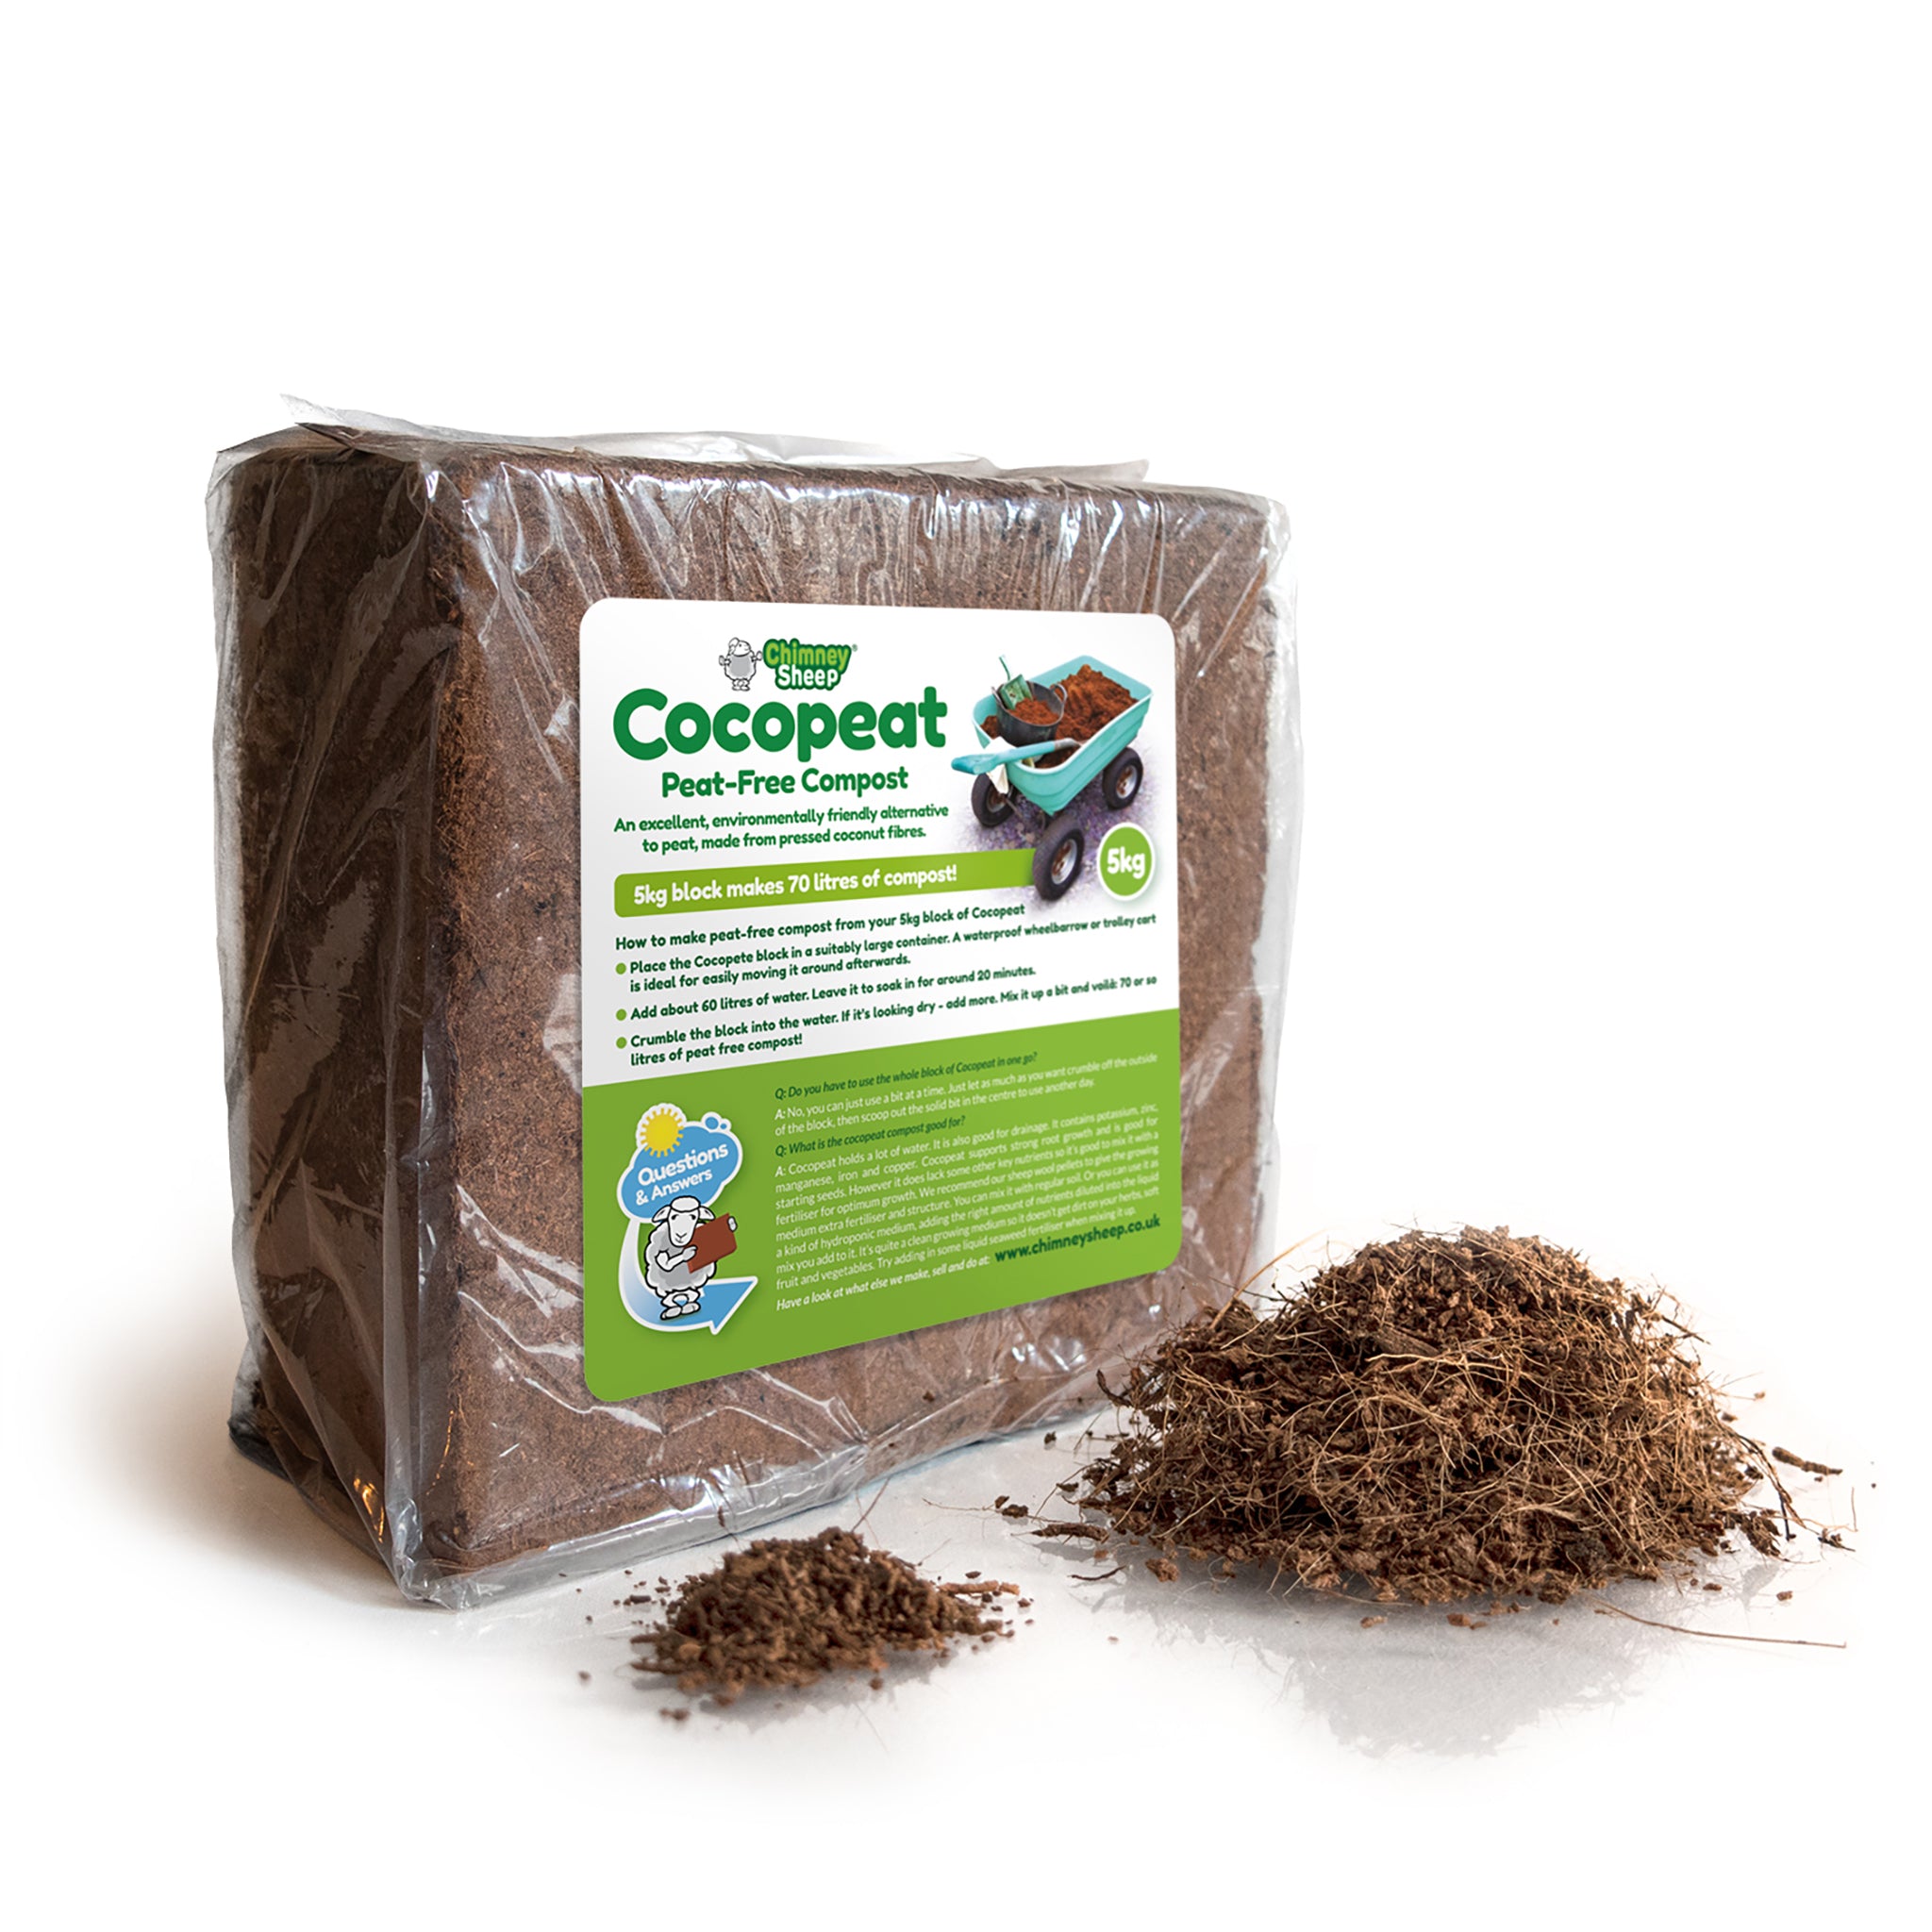 5kg block of cocopeat with small pile of loose peat free compost next to it